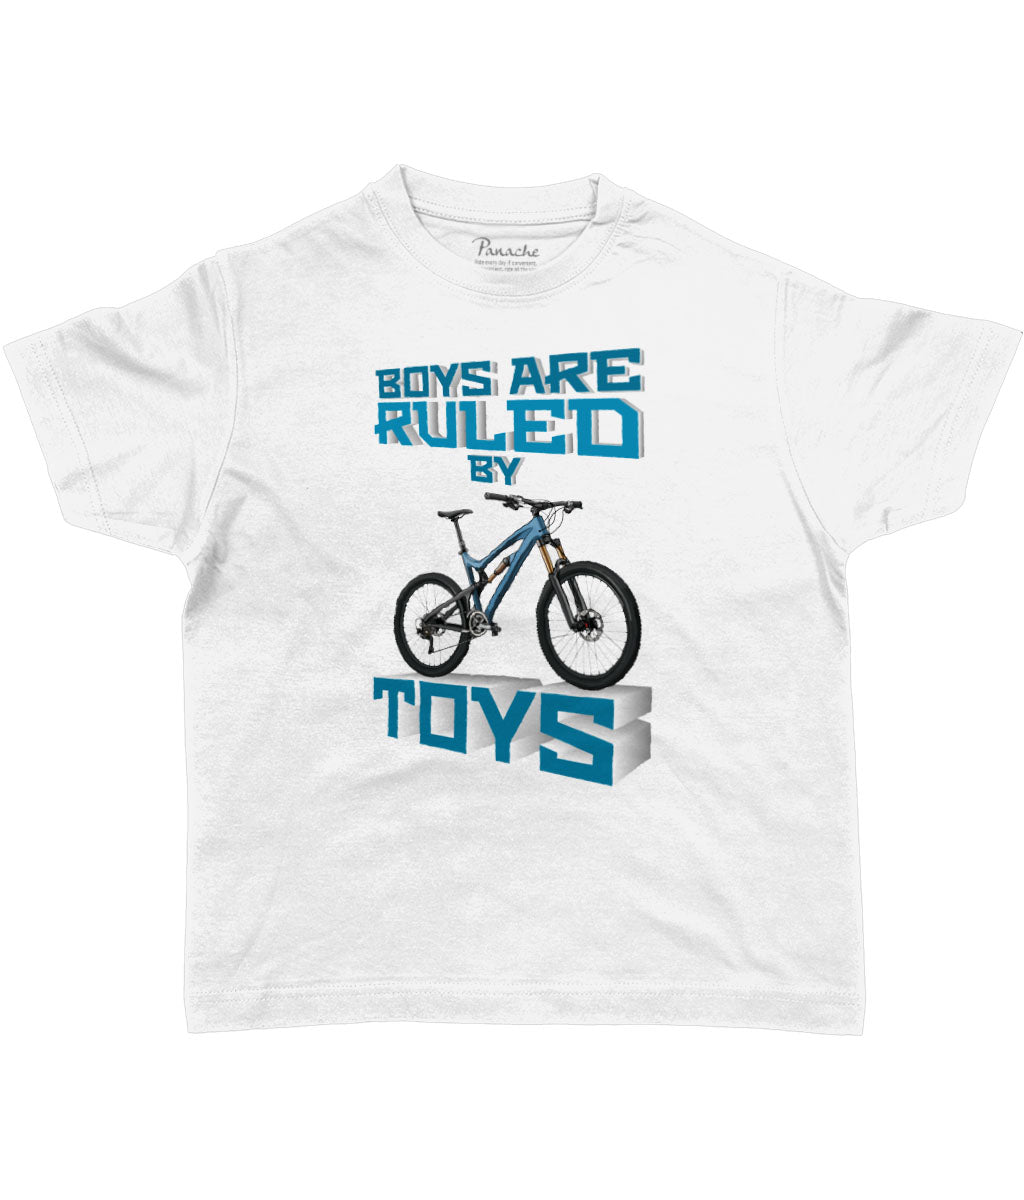 Boys Are Ruled by Toys MTB White Kids Cycling T-shirt